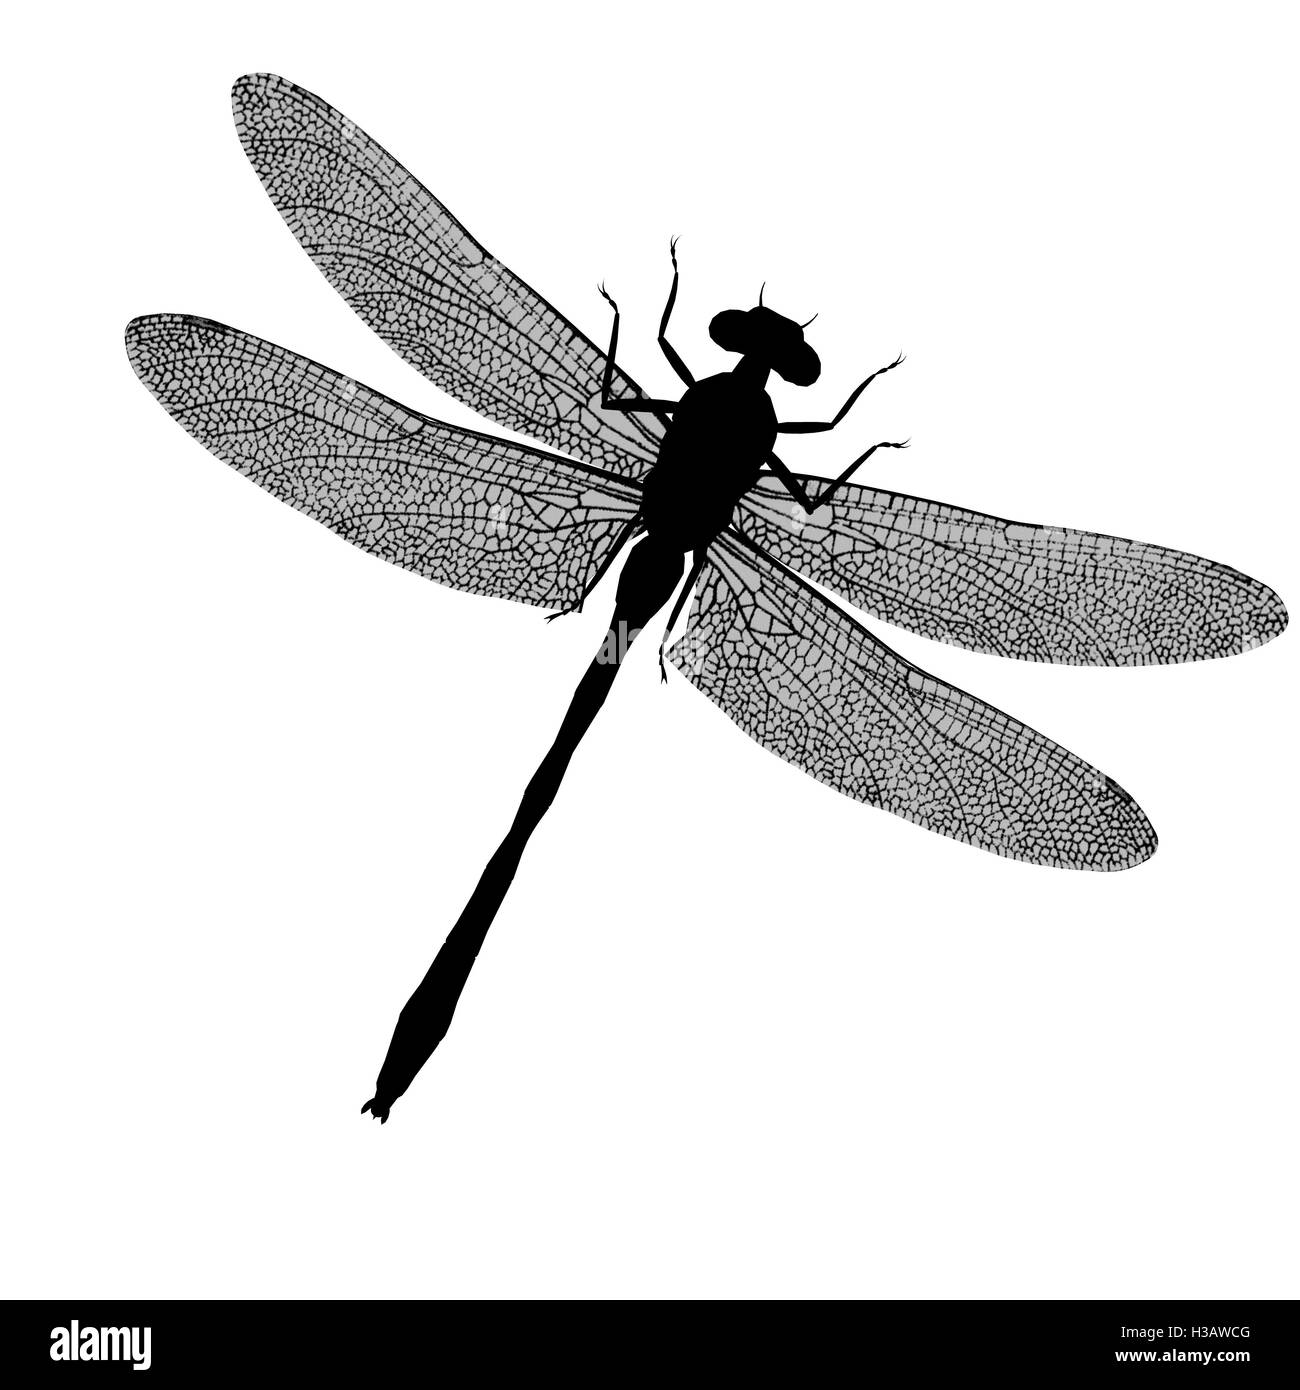 Dragonfly Silhouette Stock Photo